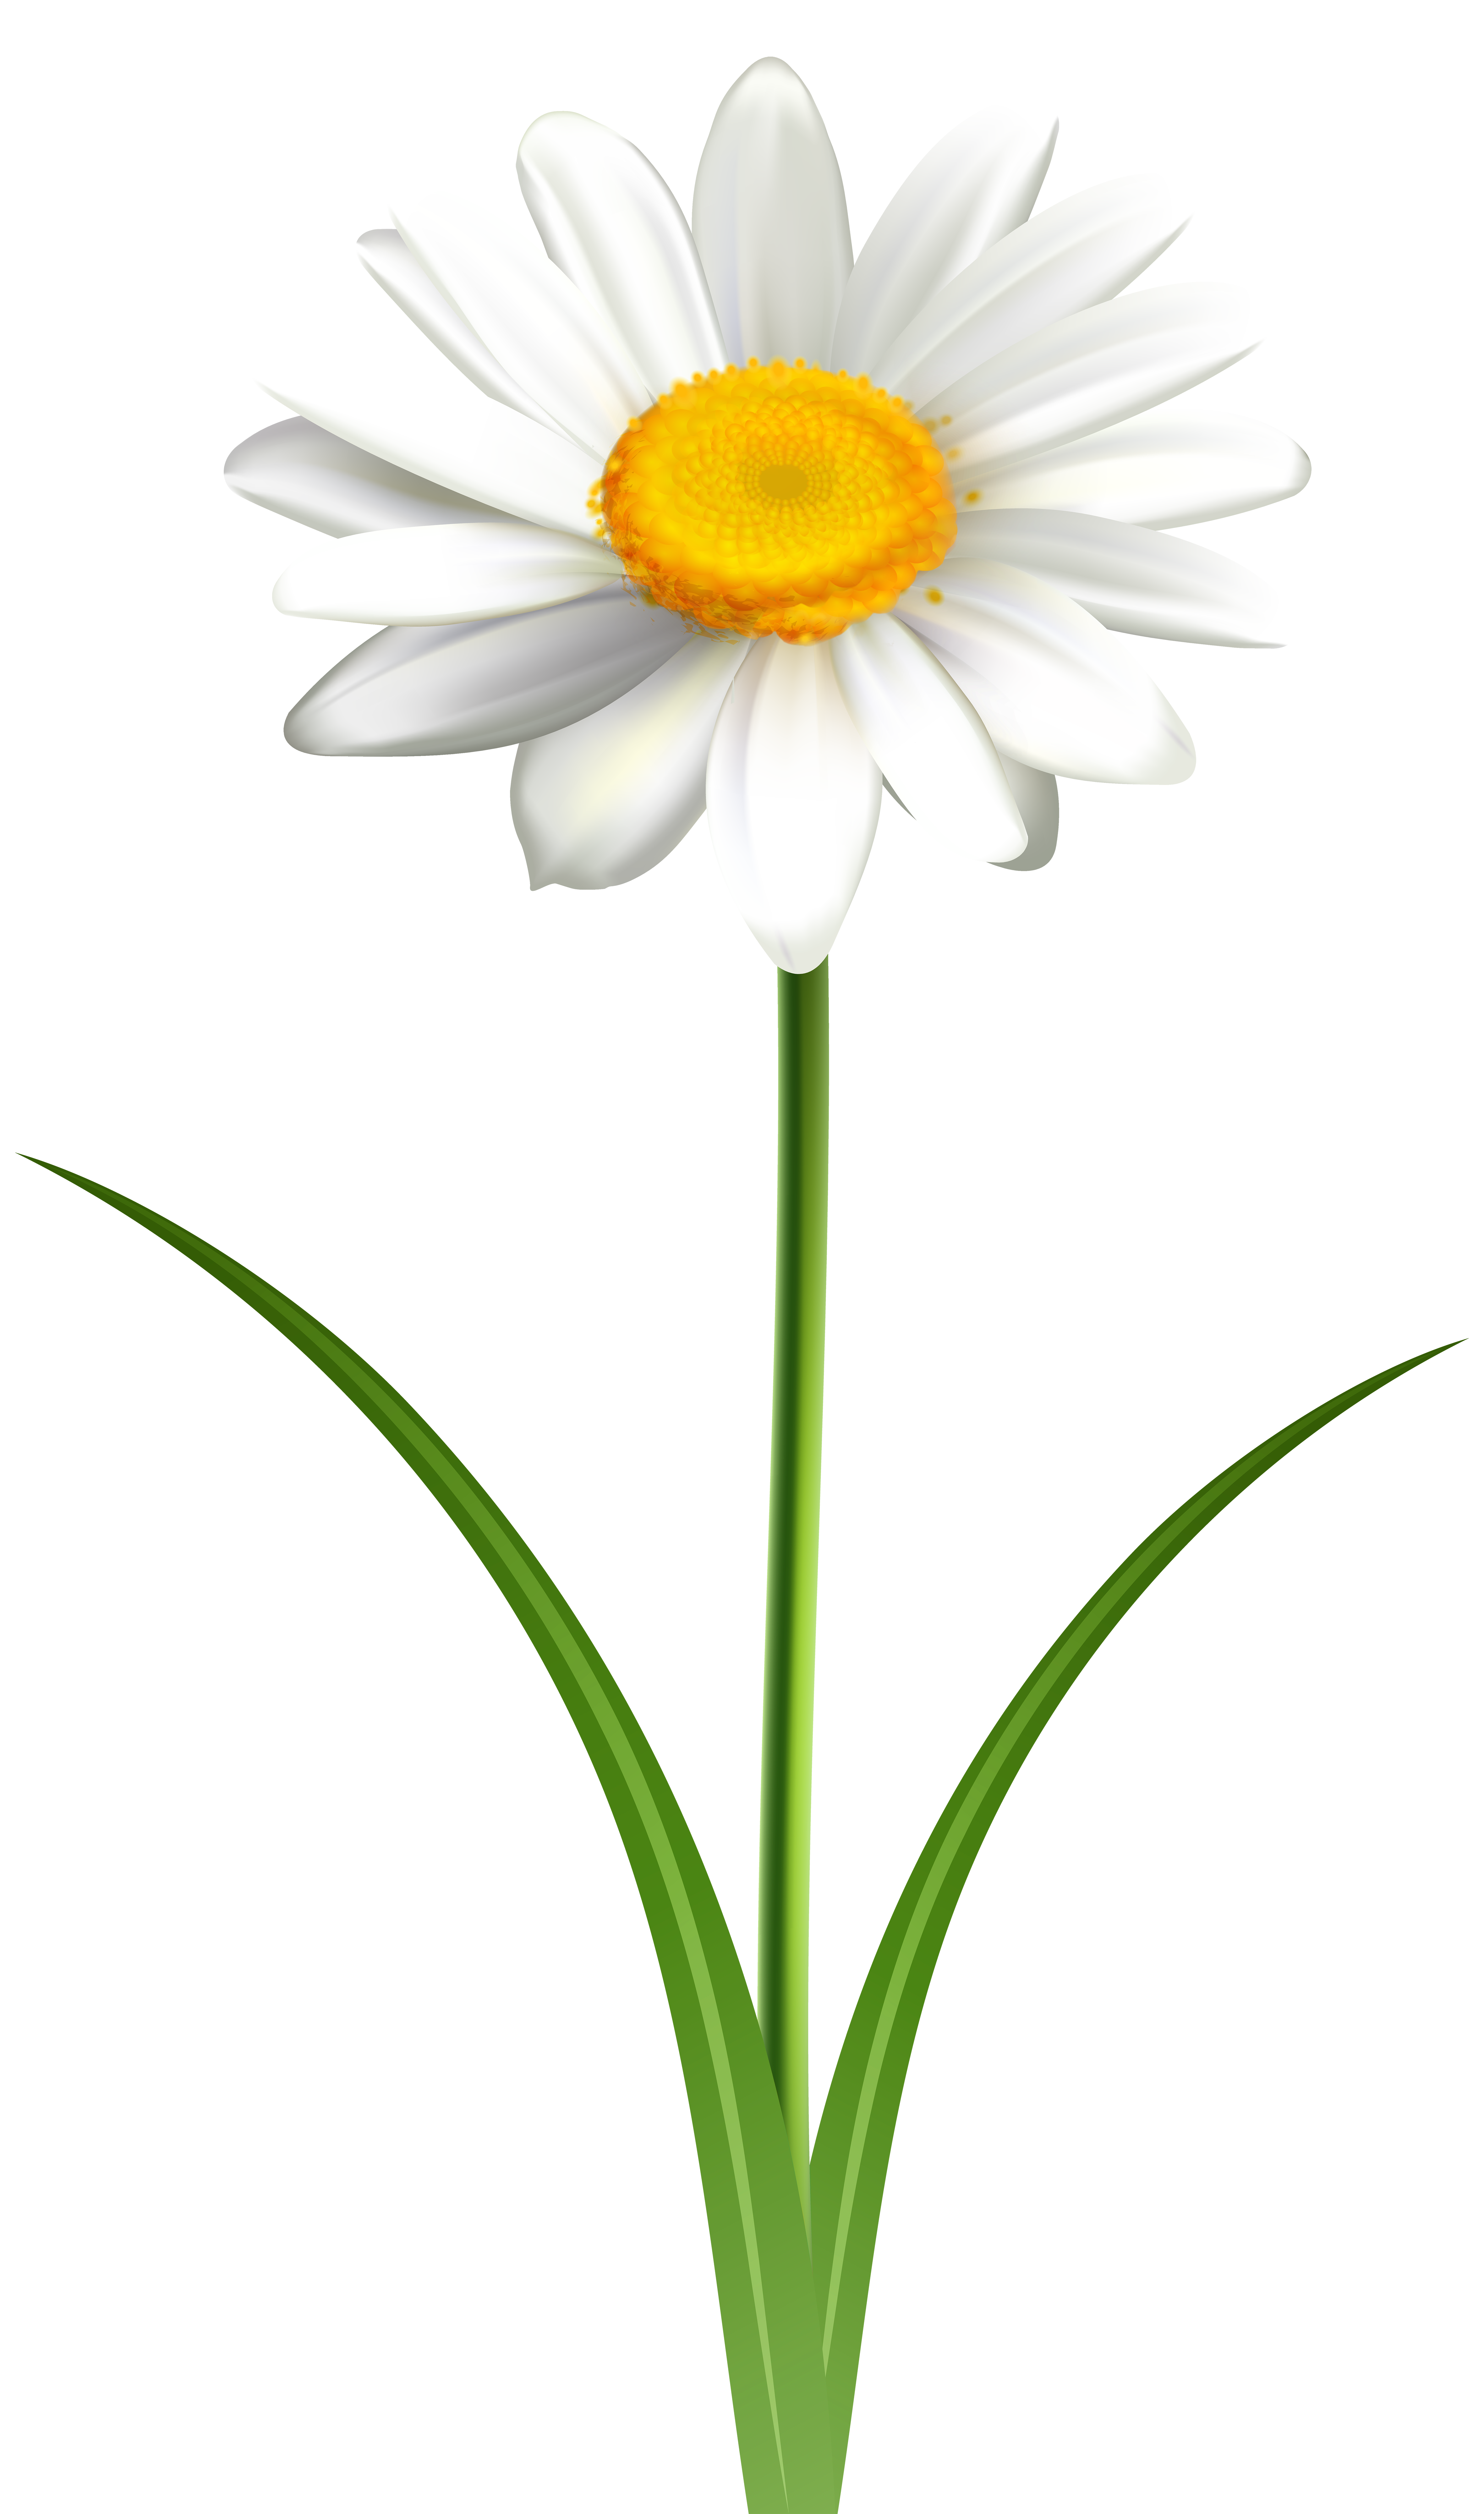 Daisy Flower Transparent PNG Clip Art Image | Gallery 